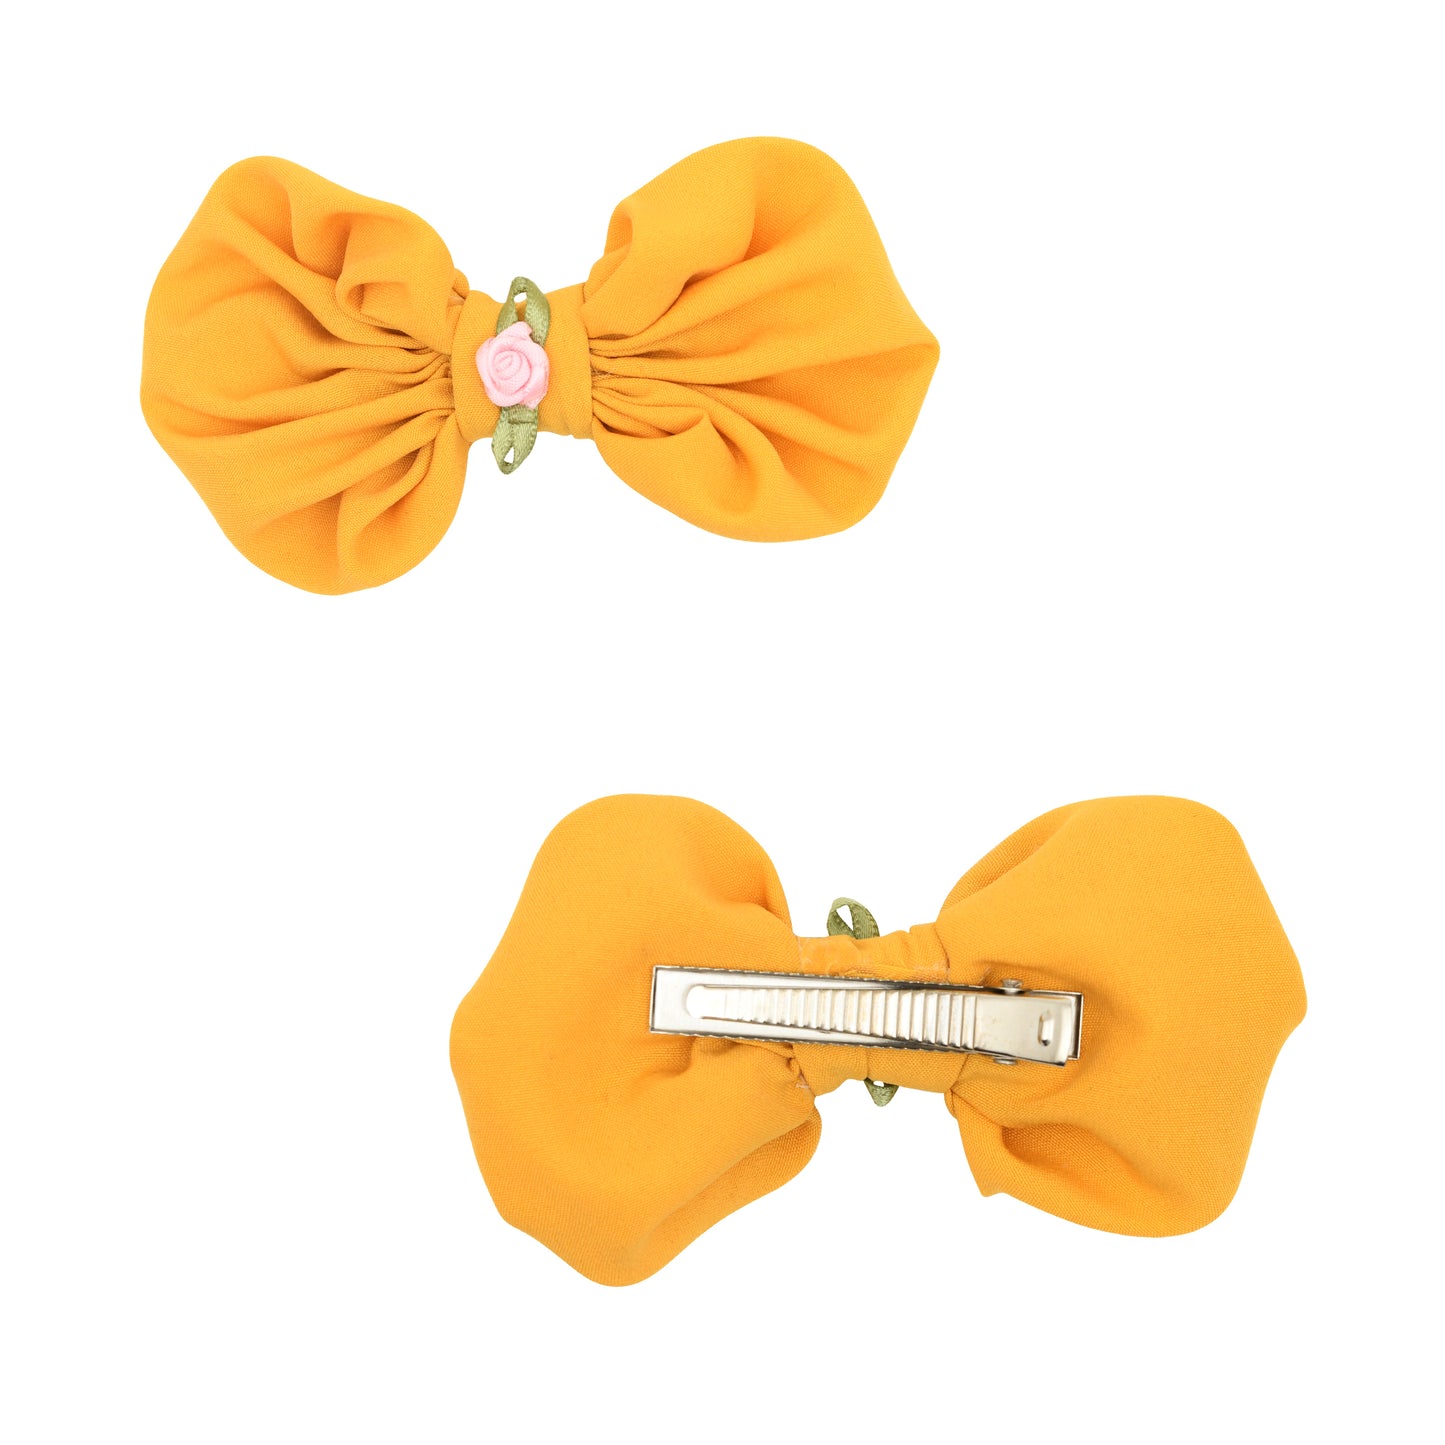 Beauty and The Bow Girls Hair Clips Pack of 7 - Multicolor